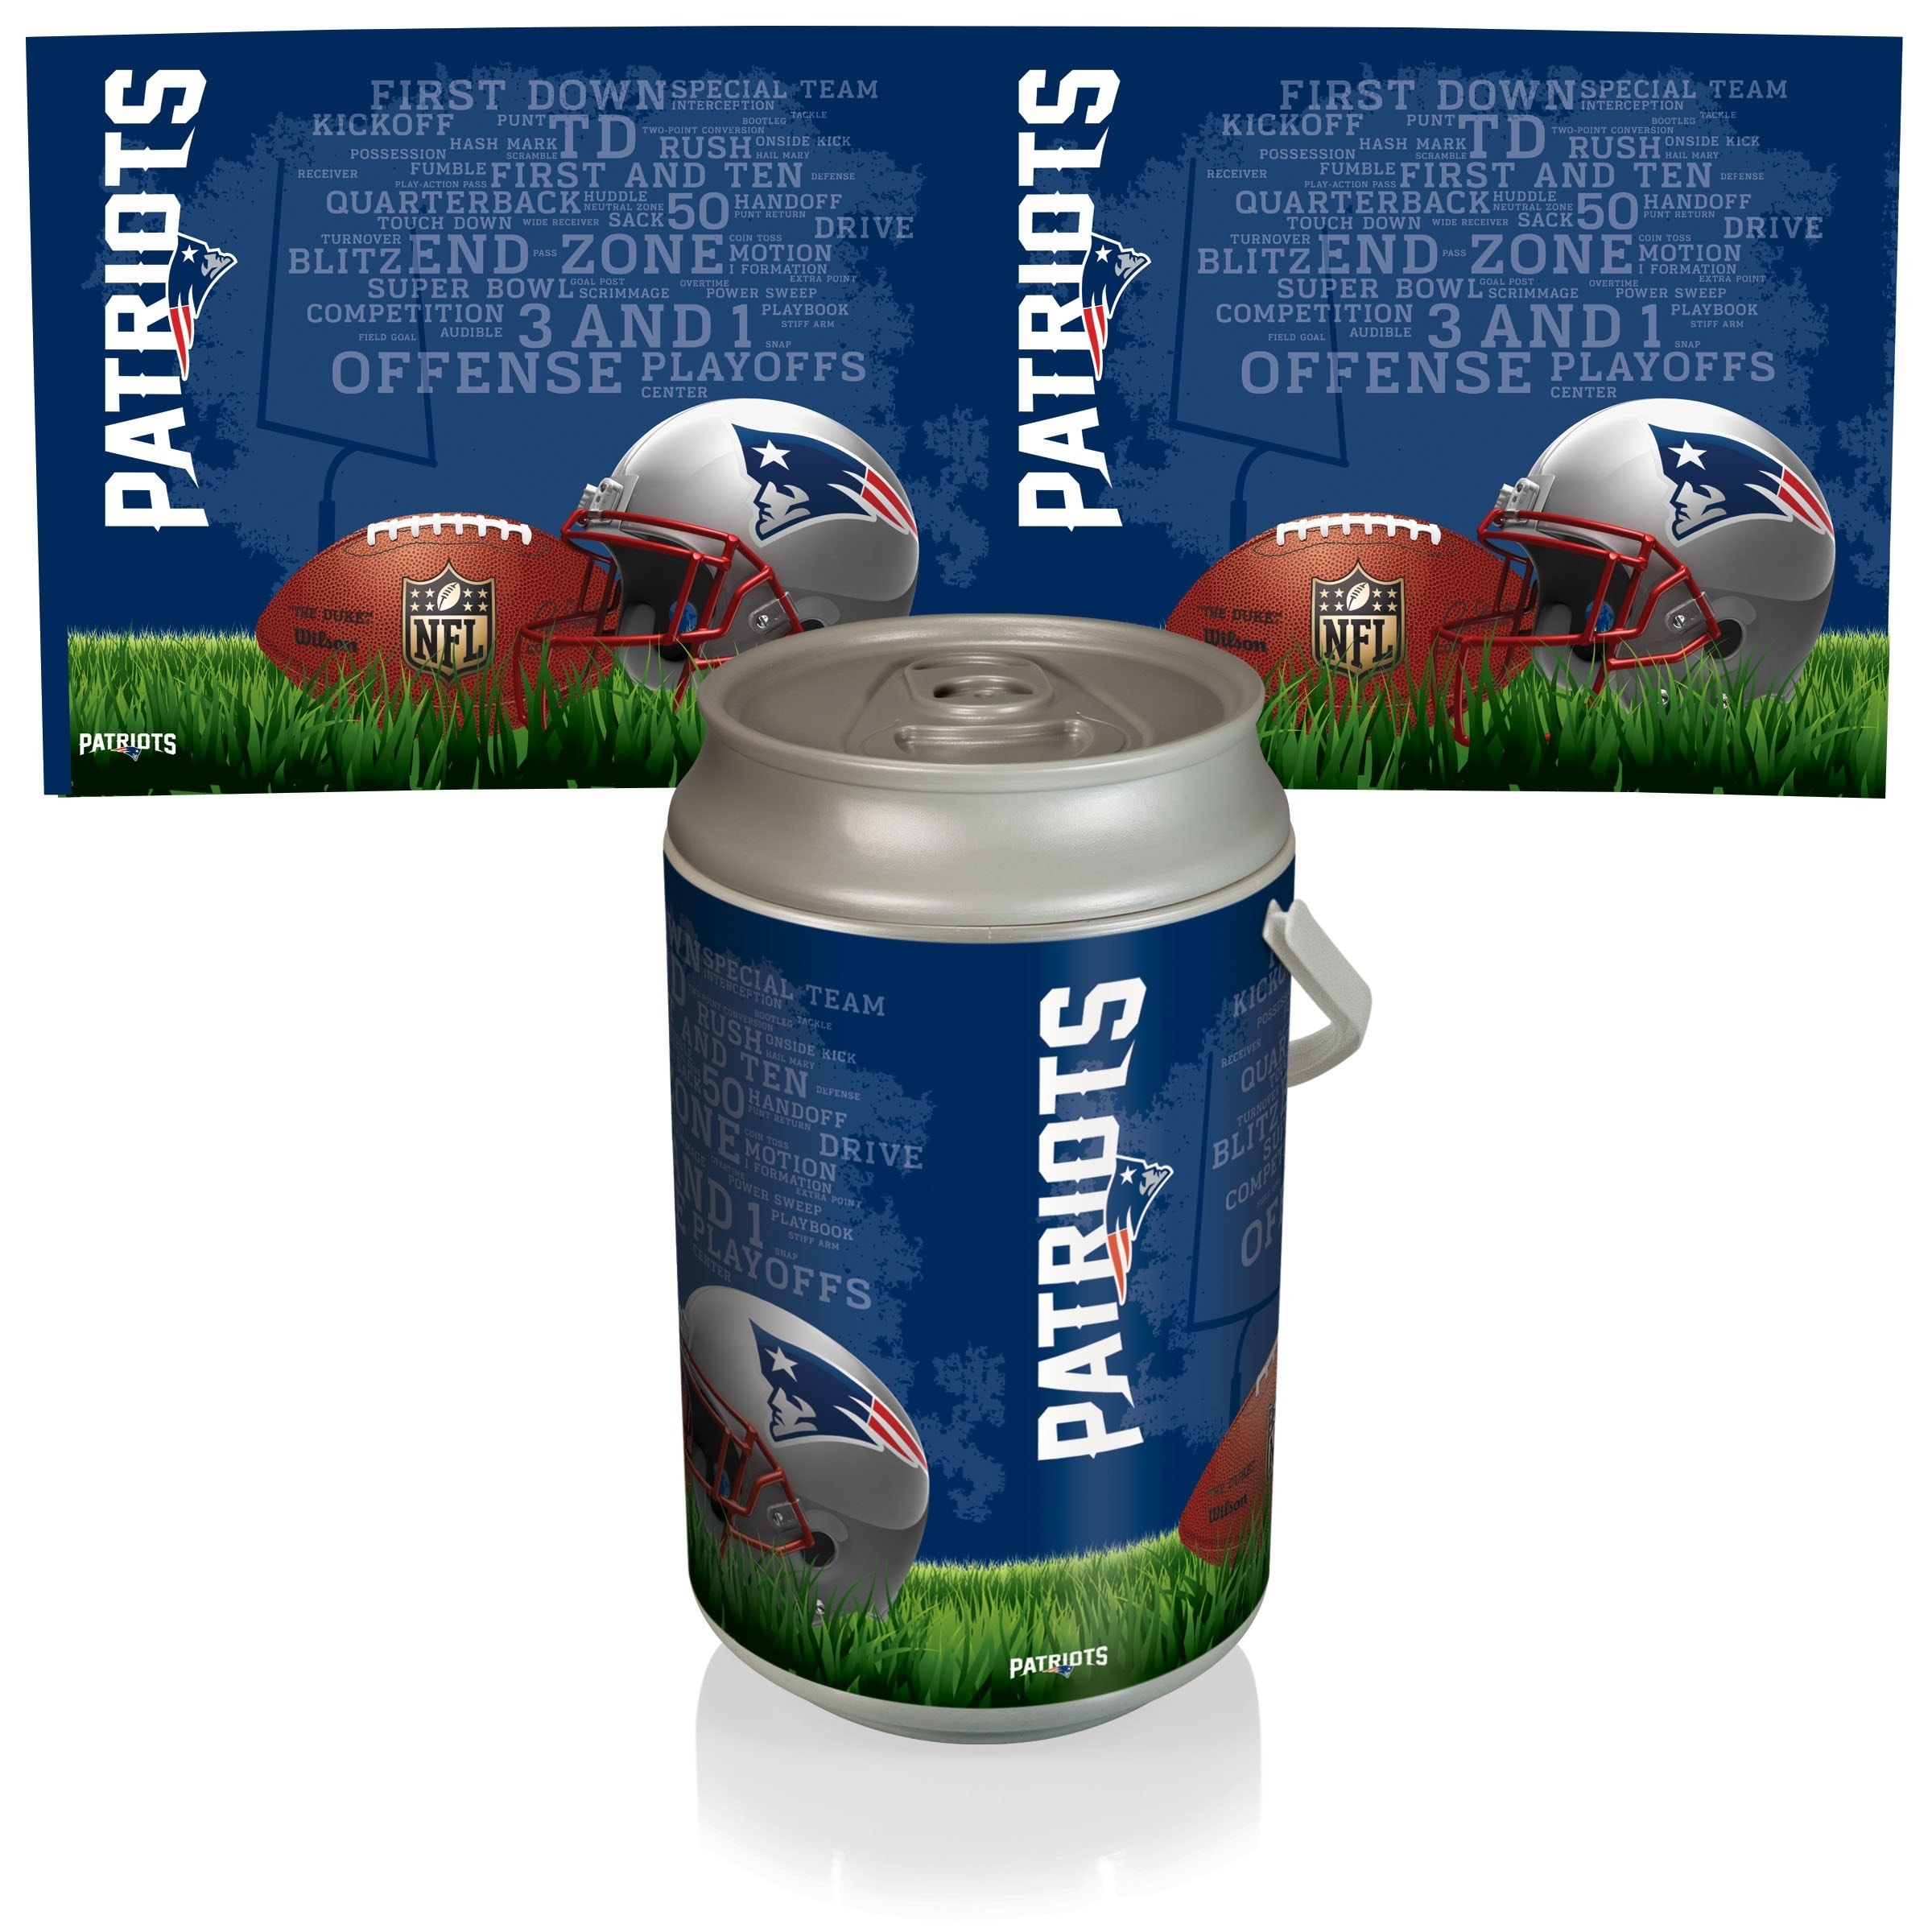 Picnic Time NFL AFC 5 gallon Mega Can Cooler Today $89.99